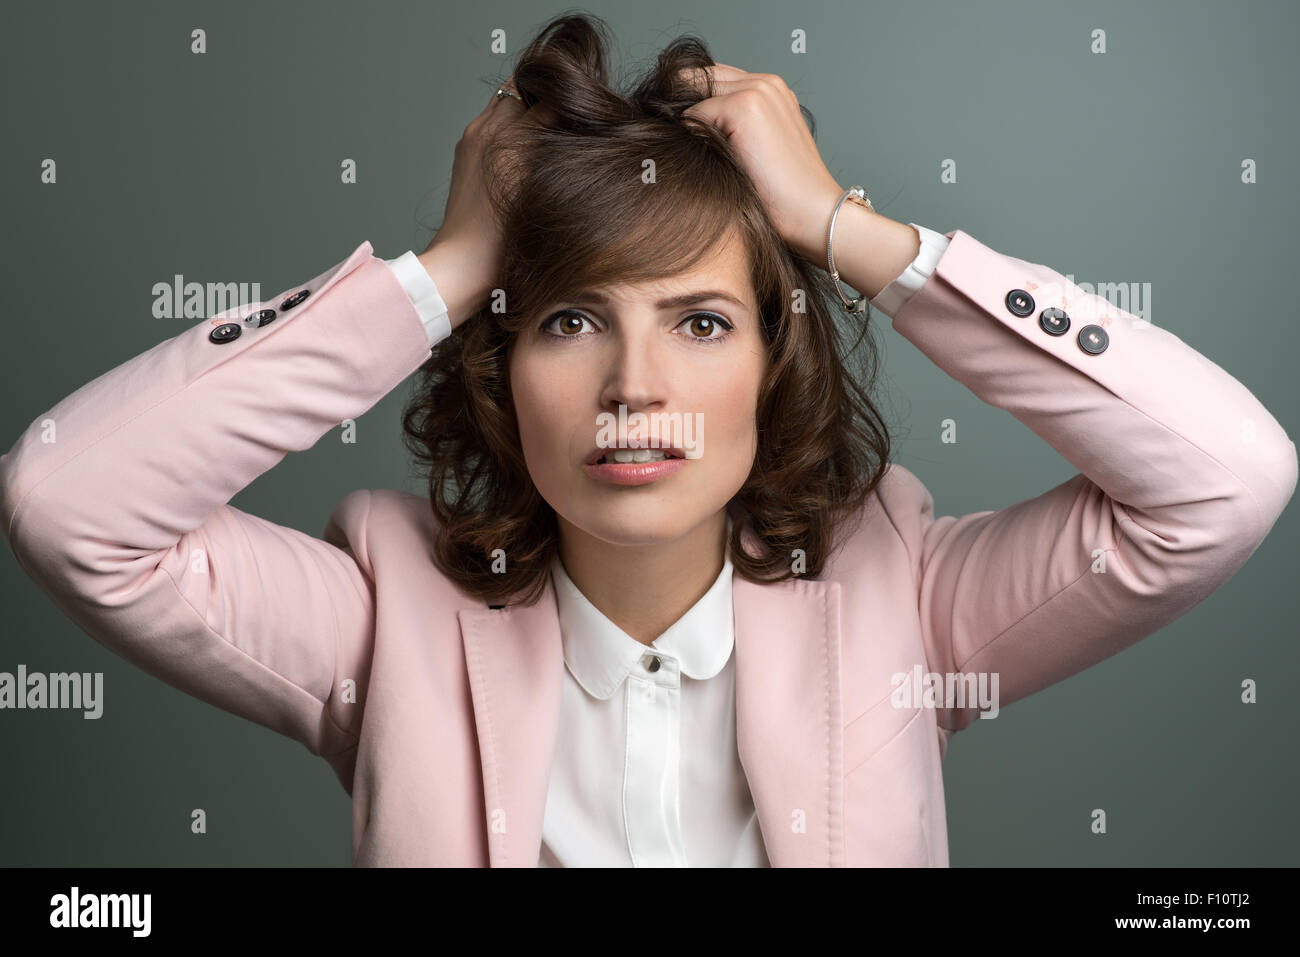 Attractive stylish young woman in a pink jacket tearing at her brown hair with her hands as she vents her frustration, over grey Stock Photo